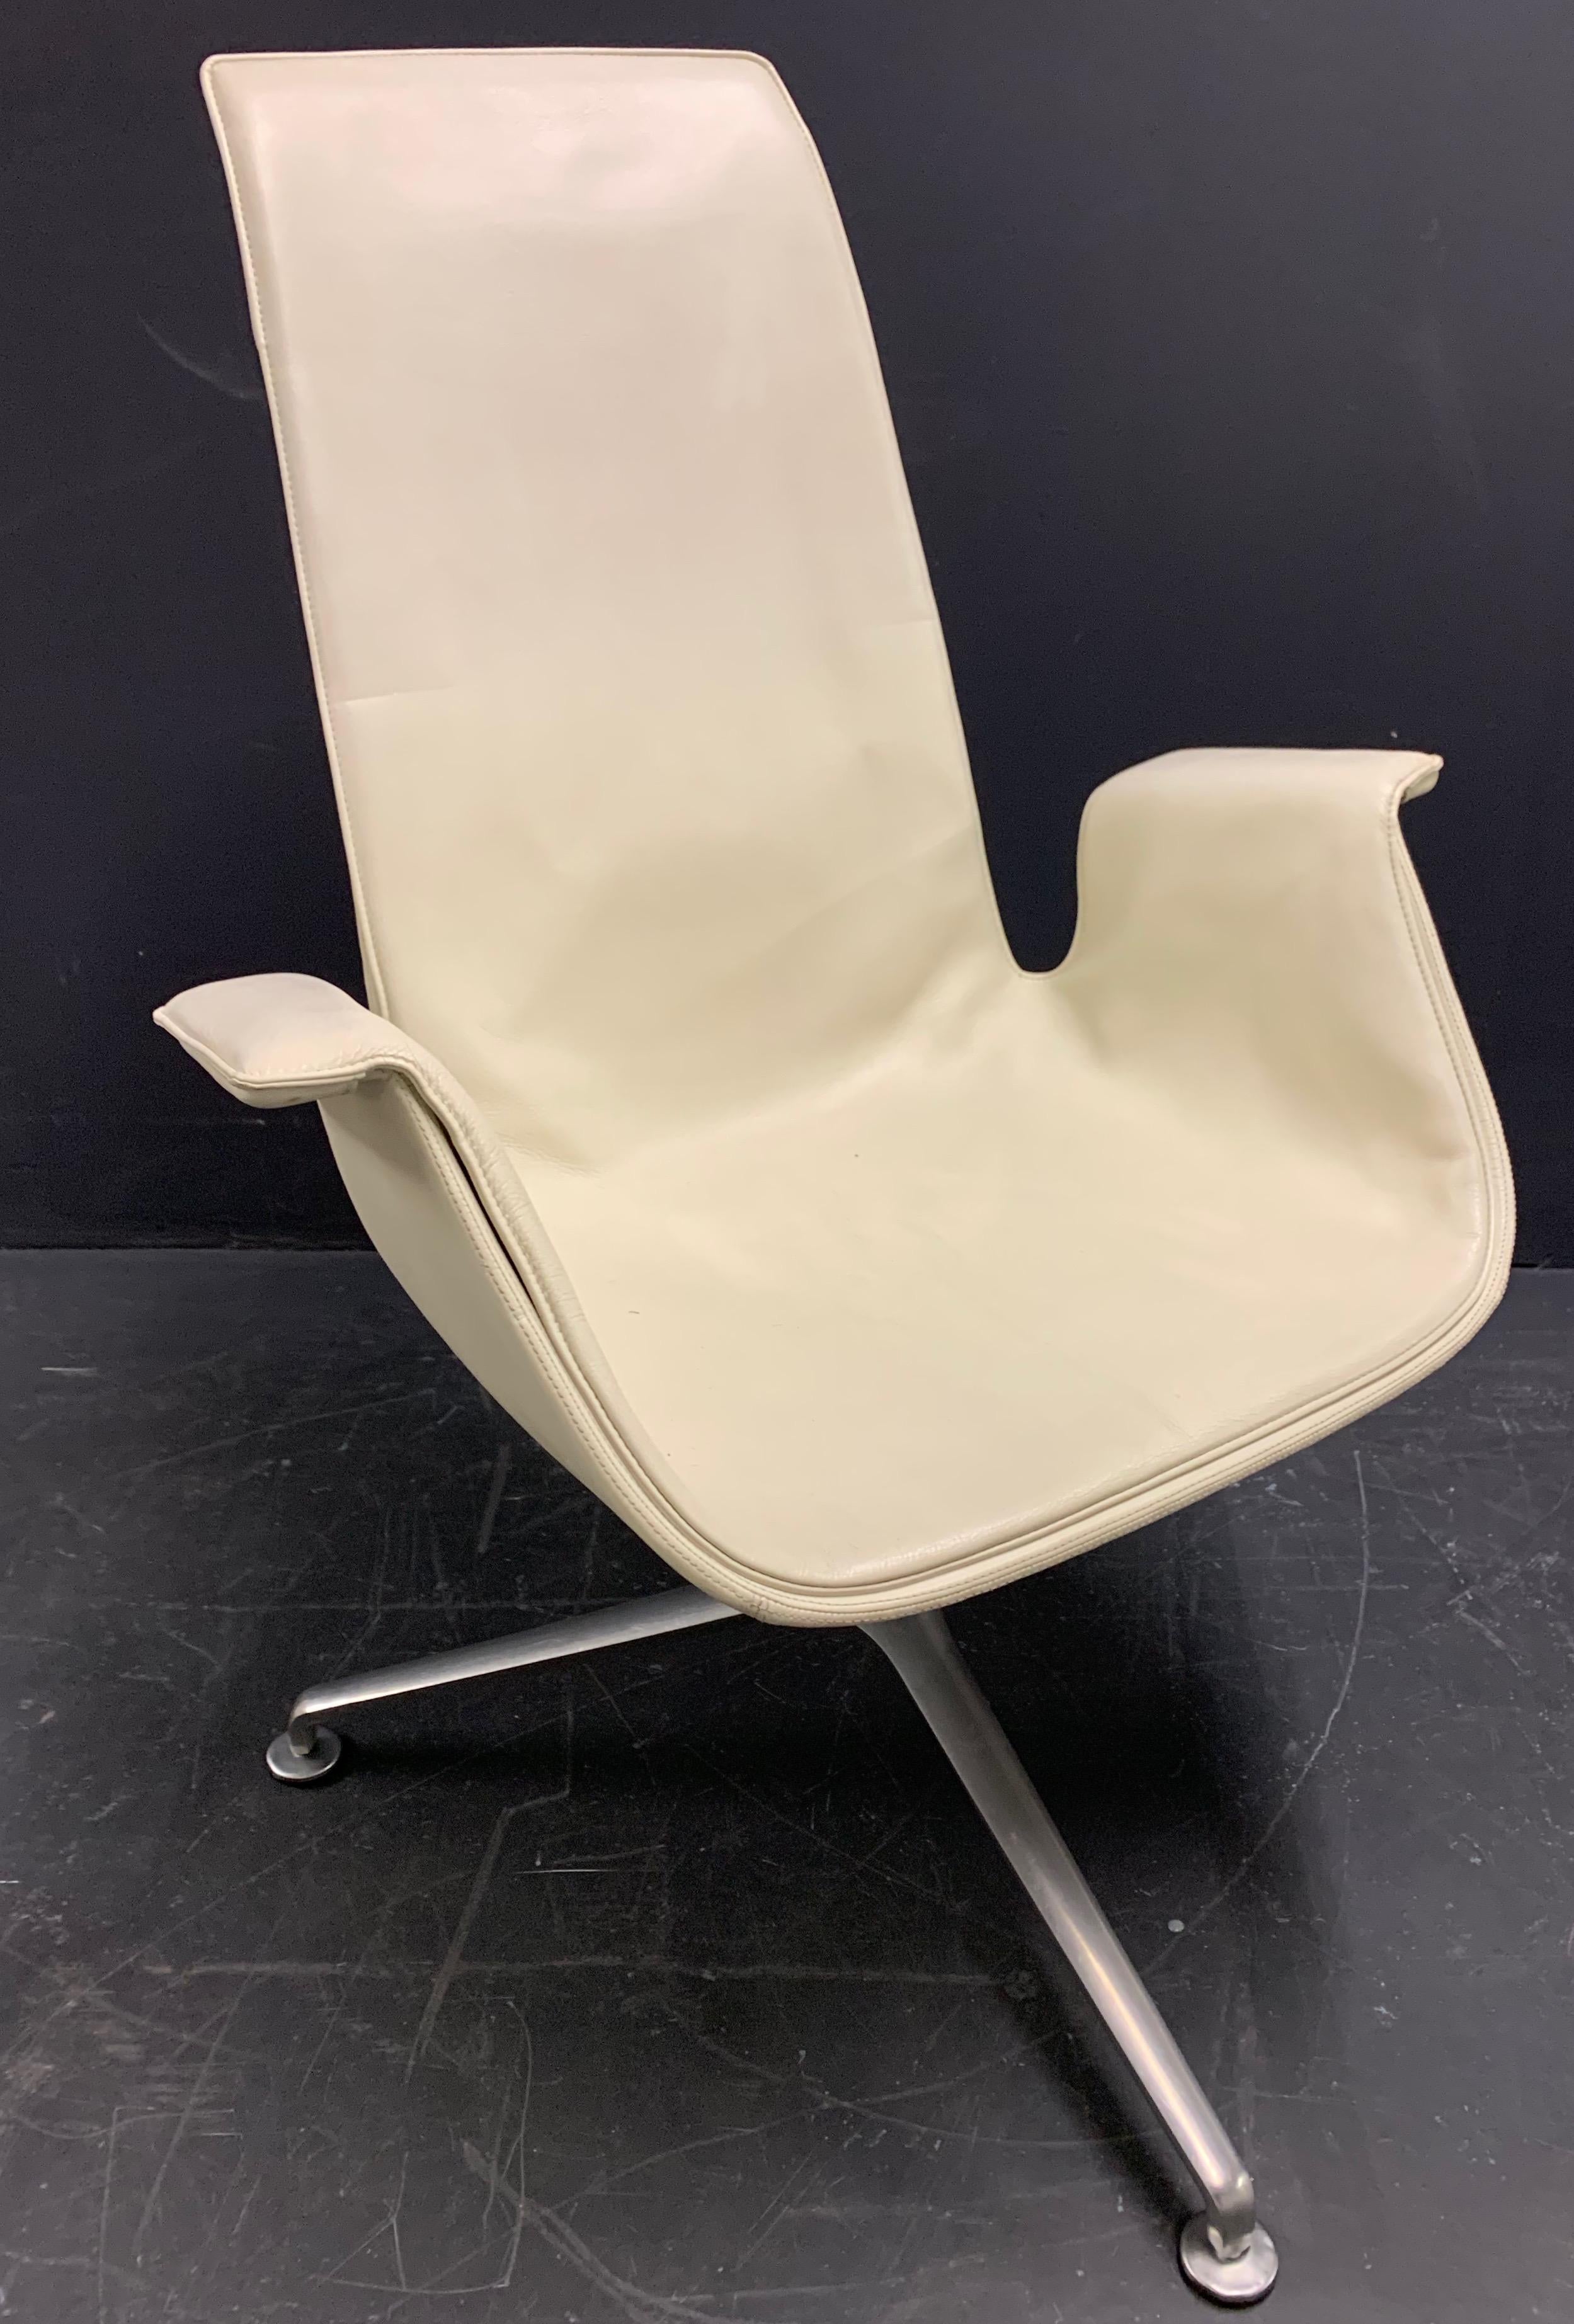 FK6725 Tulip Chair by Fabricius and Kastholm '2 Available' For Sale 5